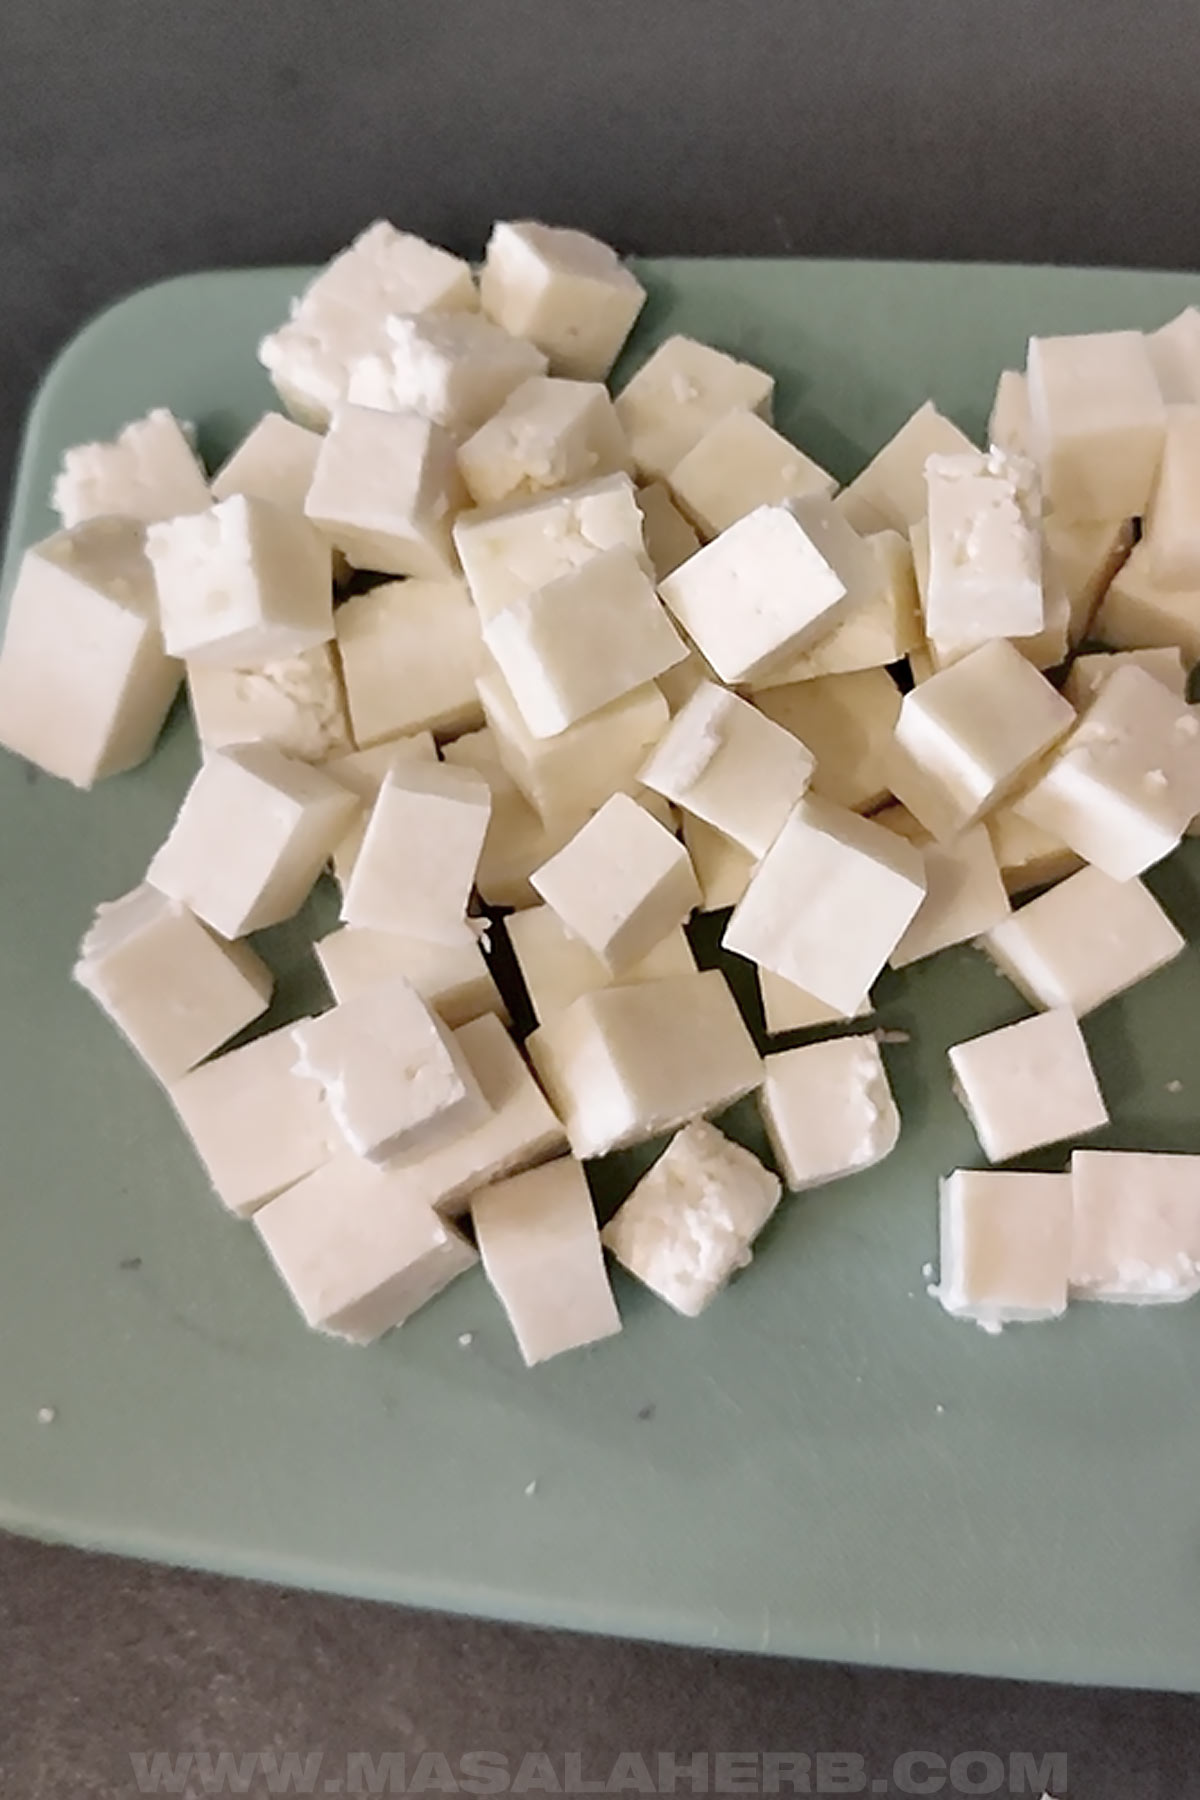 Indian paneer cottage cheese made from scratch at home